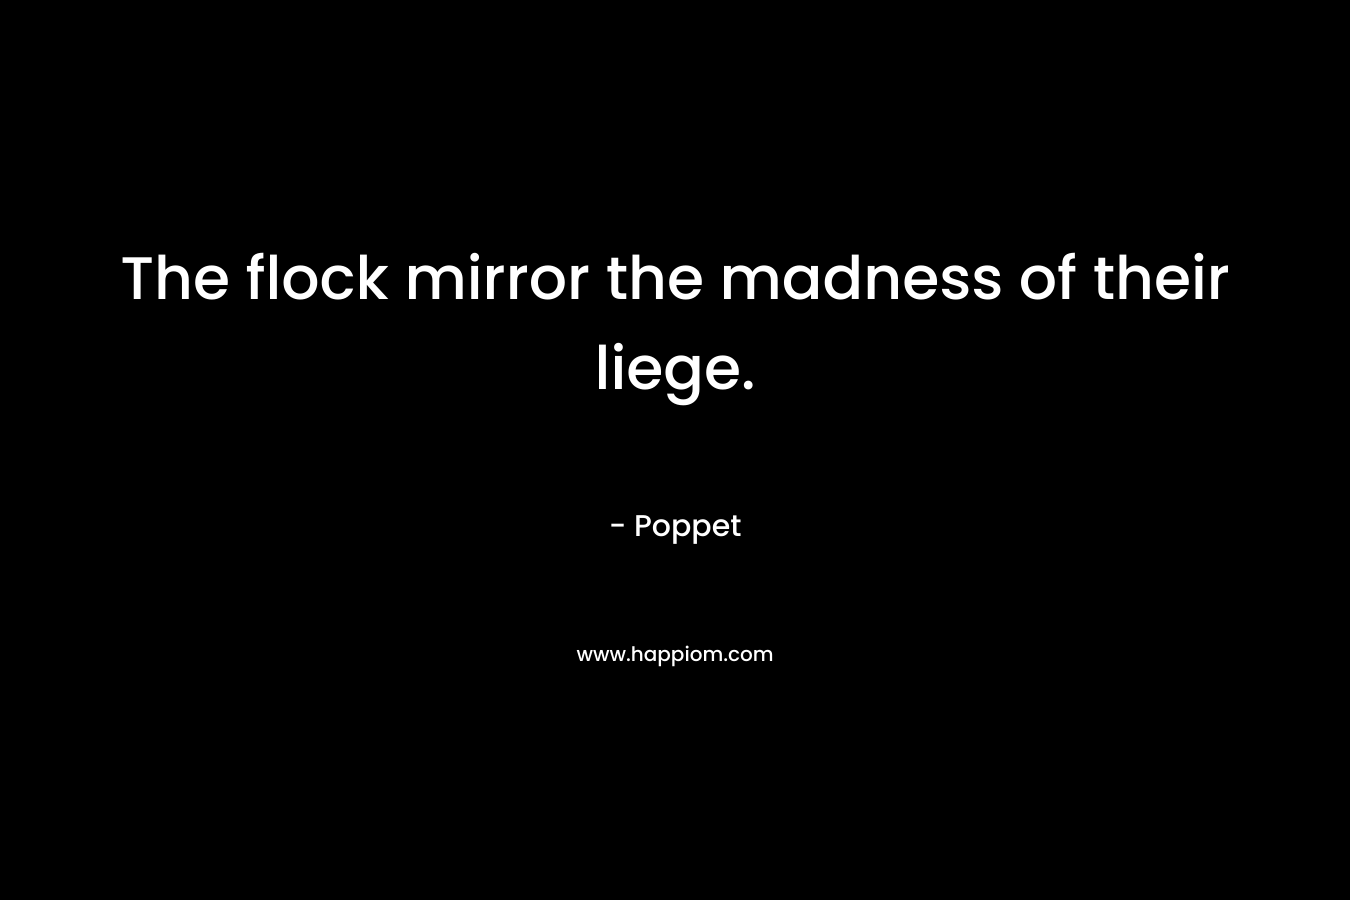 The flock mirror the madness of their liege. – Poppet